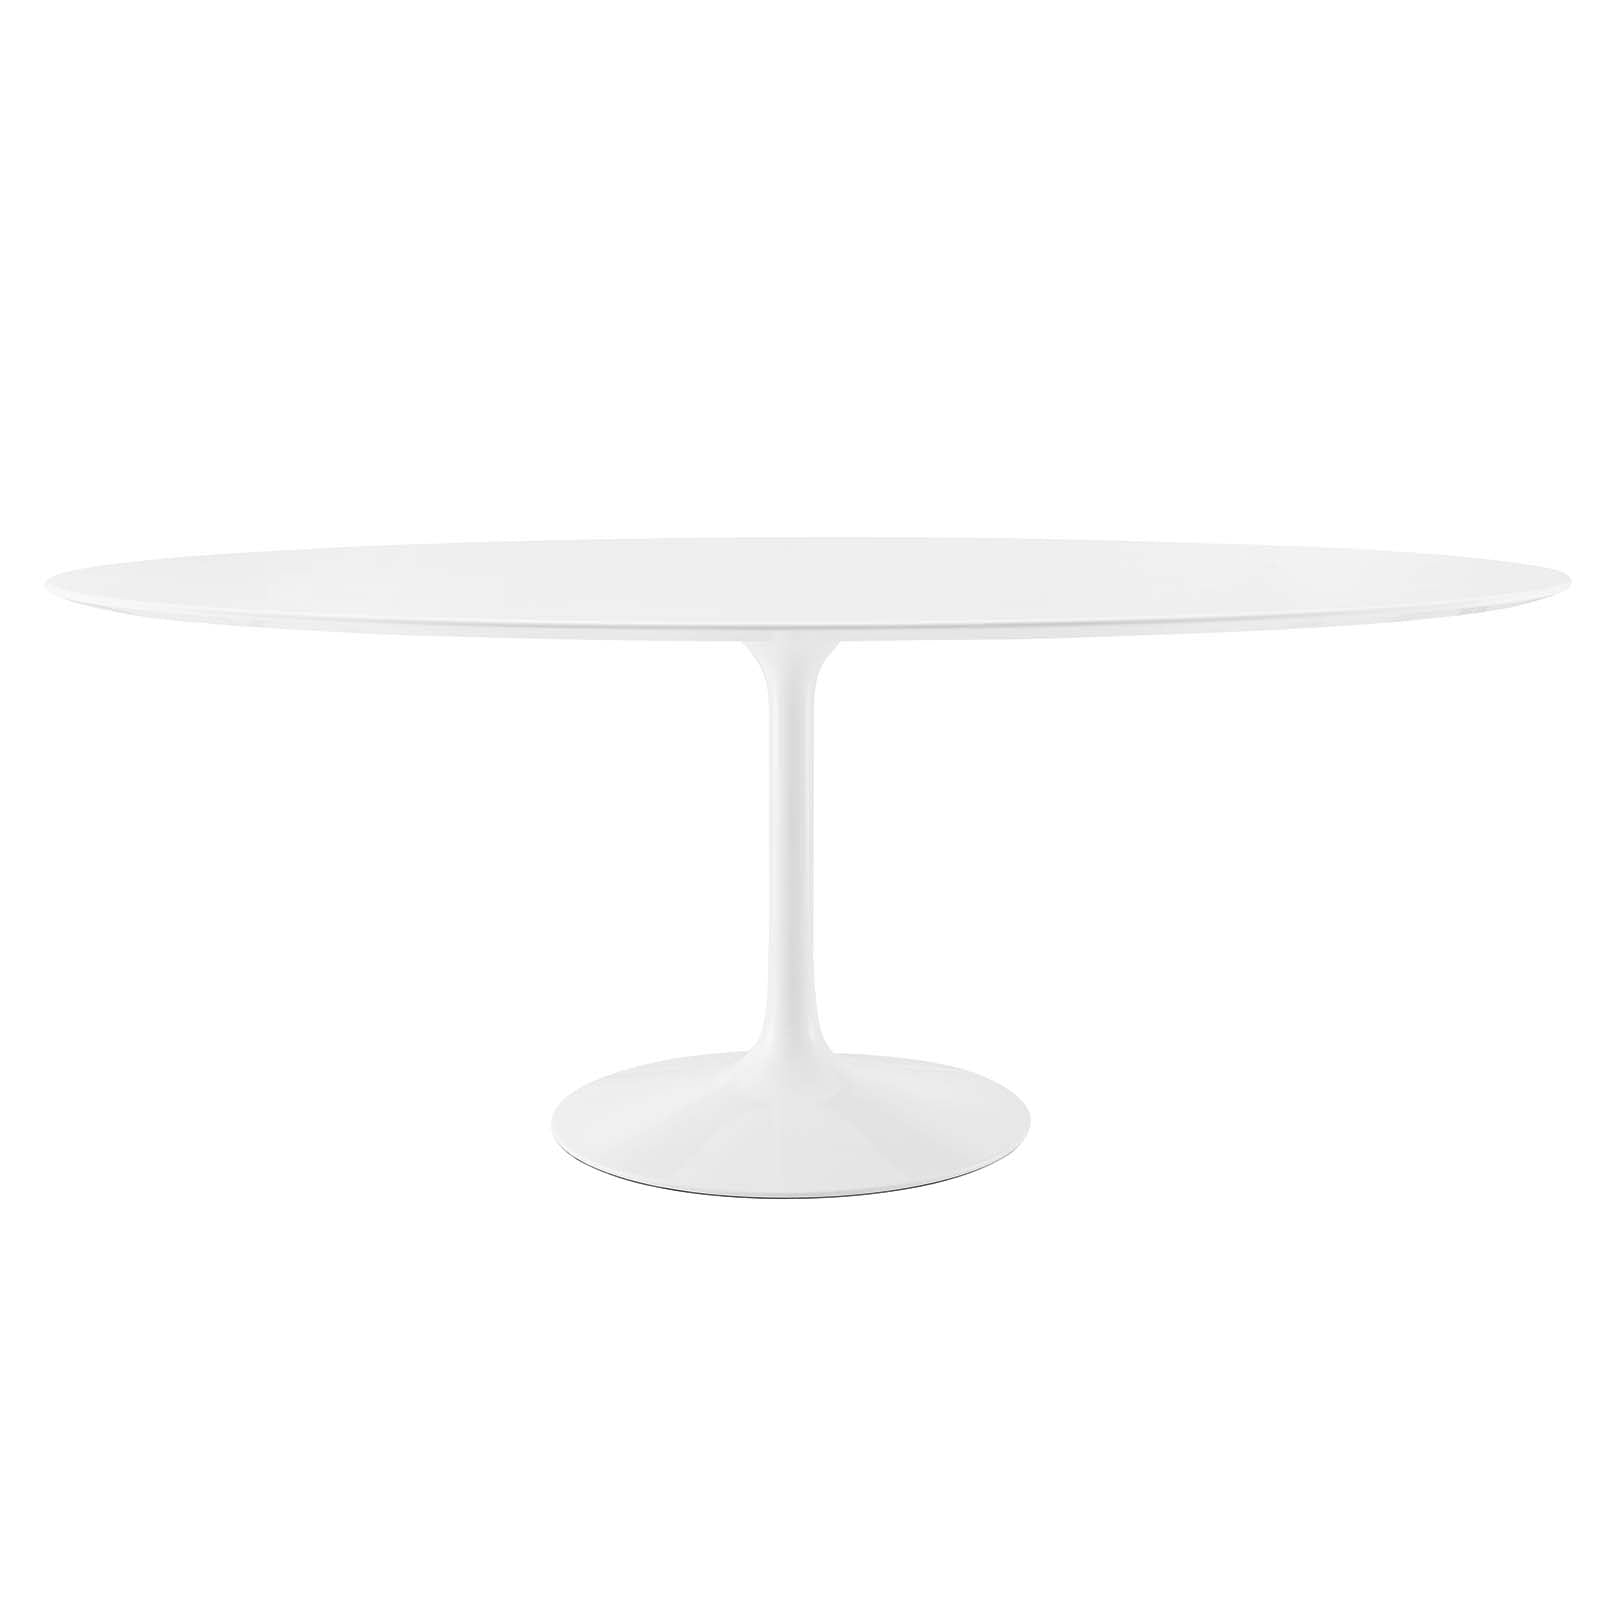 Lippa 78" Oval Wood Top Dining Table